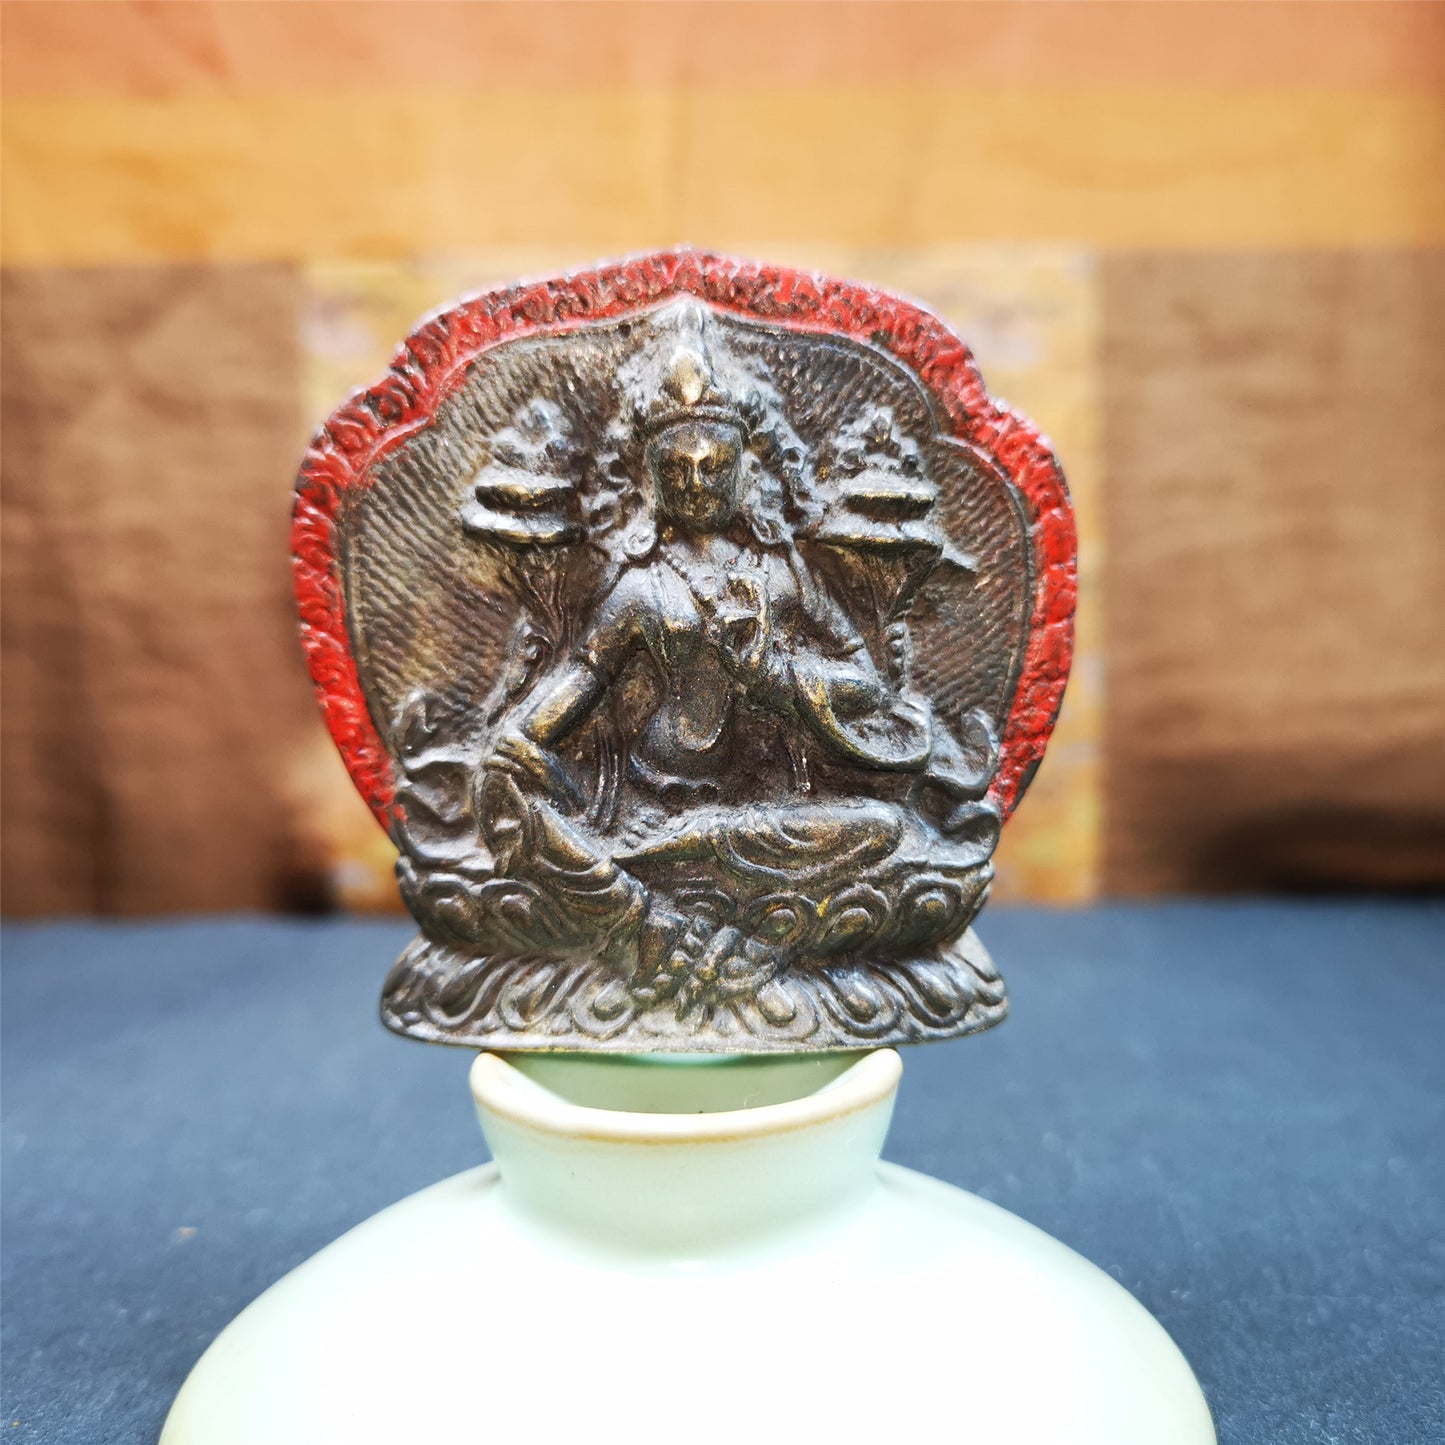 This small green tara statue was collect from Jiegu Monastray,about 80 years old. It's an old-style green tara statue,made of copper and painted with mineral pigments,size is about 2.16 by 1.97 inches. The back is carved mantra of Body, Speach,Mind